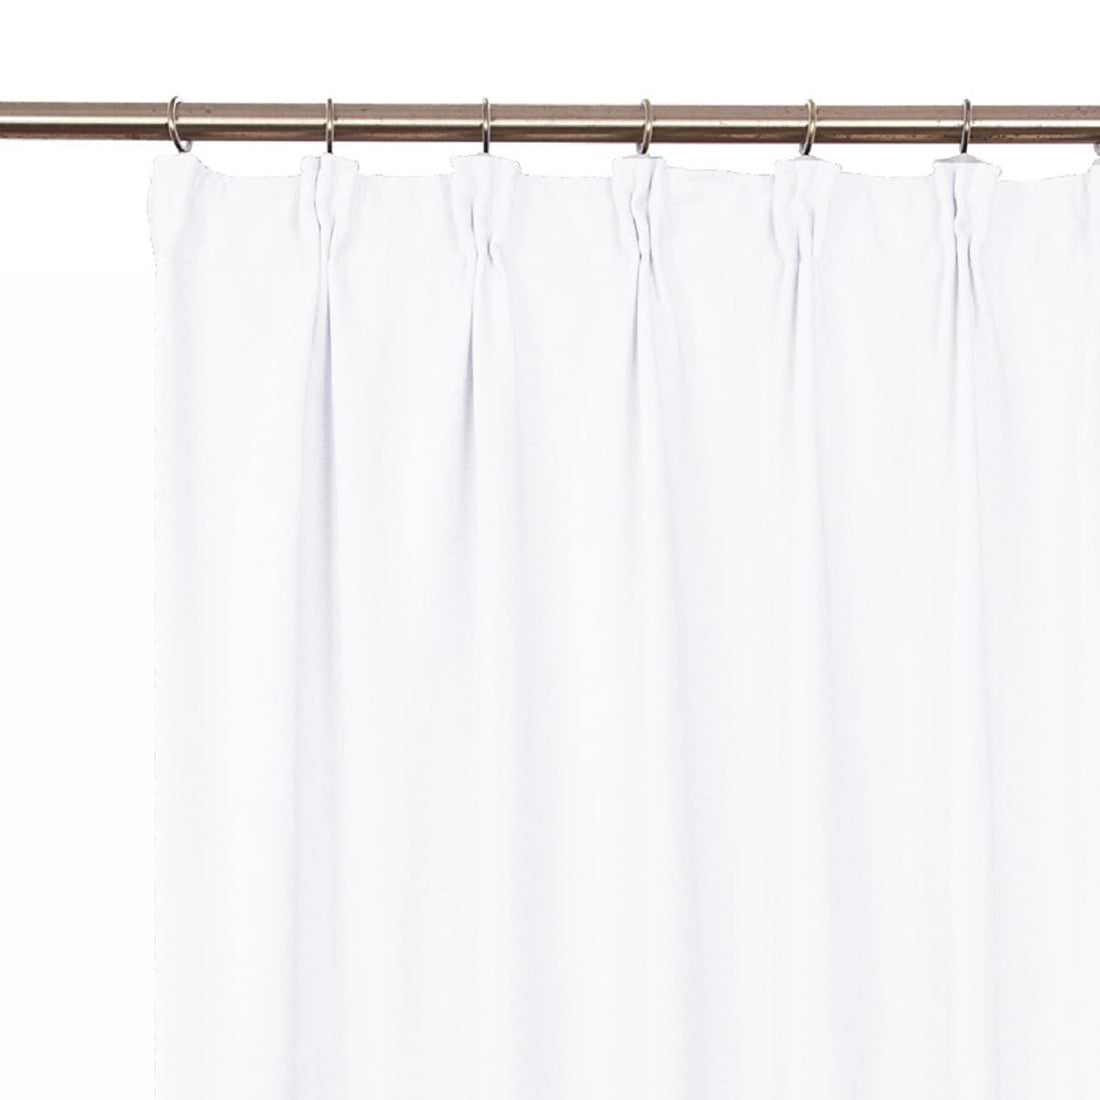 CAROL WHITE OPAQUE CURTAIN 200X280 CM WEBBING AND CONCEALED HANGING LOOP - best price from Maltashopper.com BR480009483